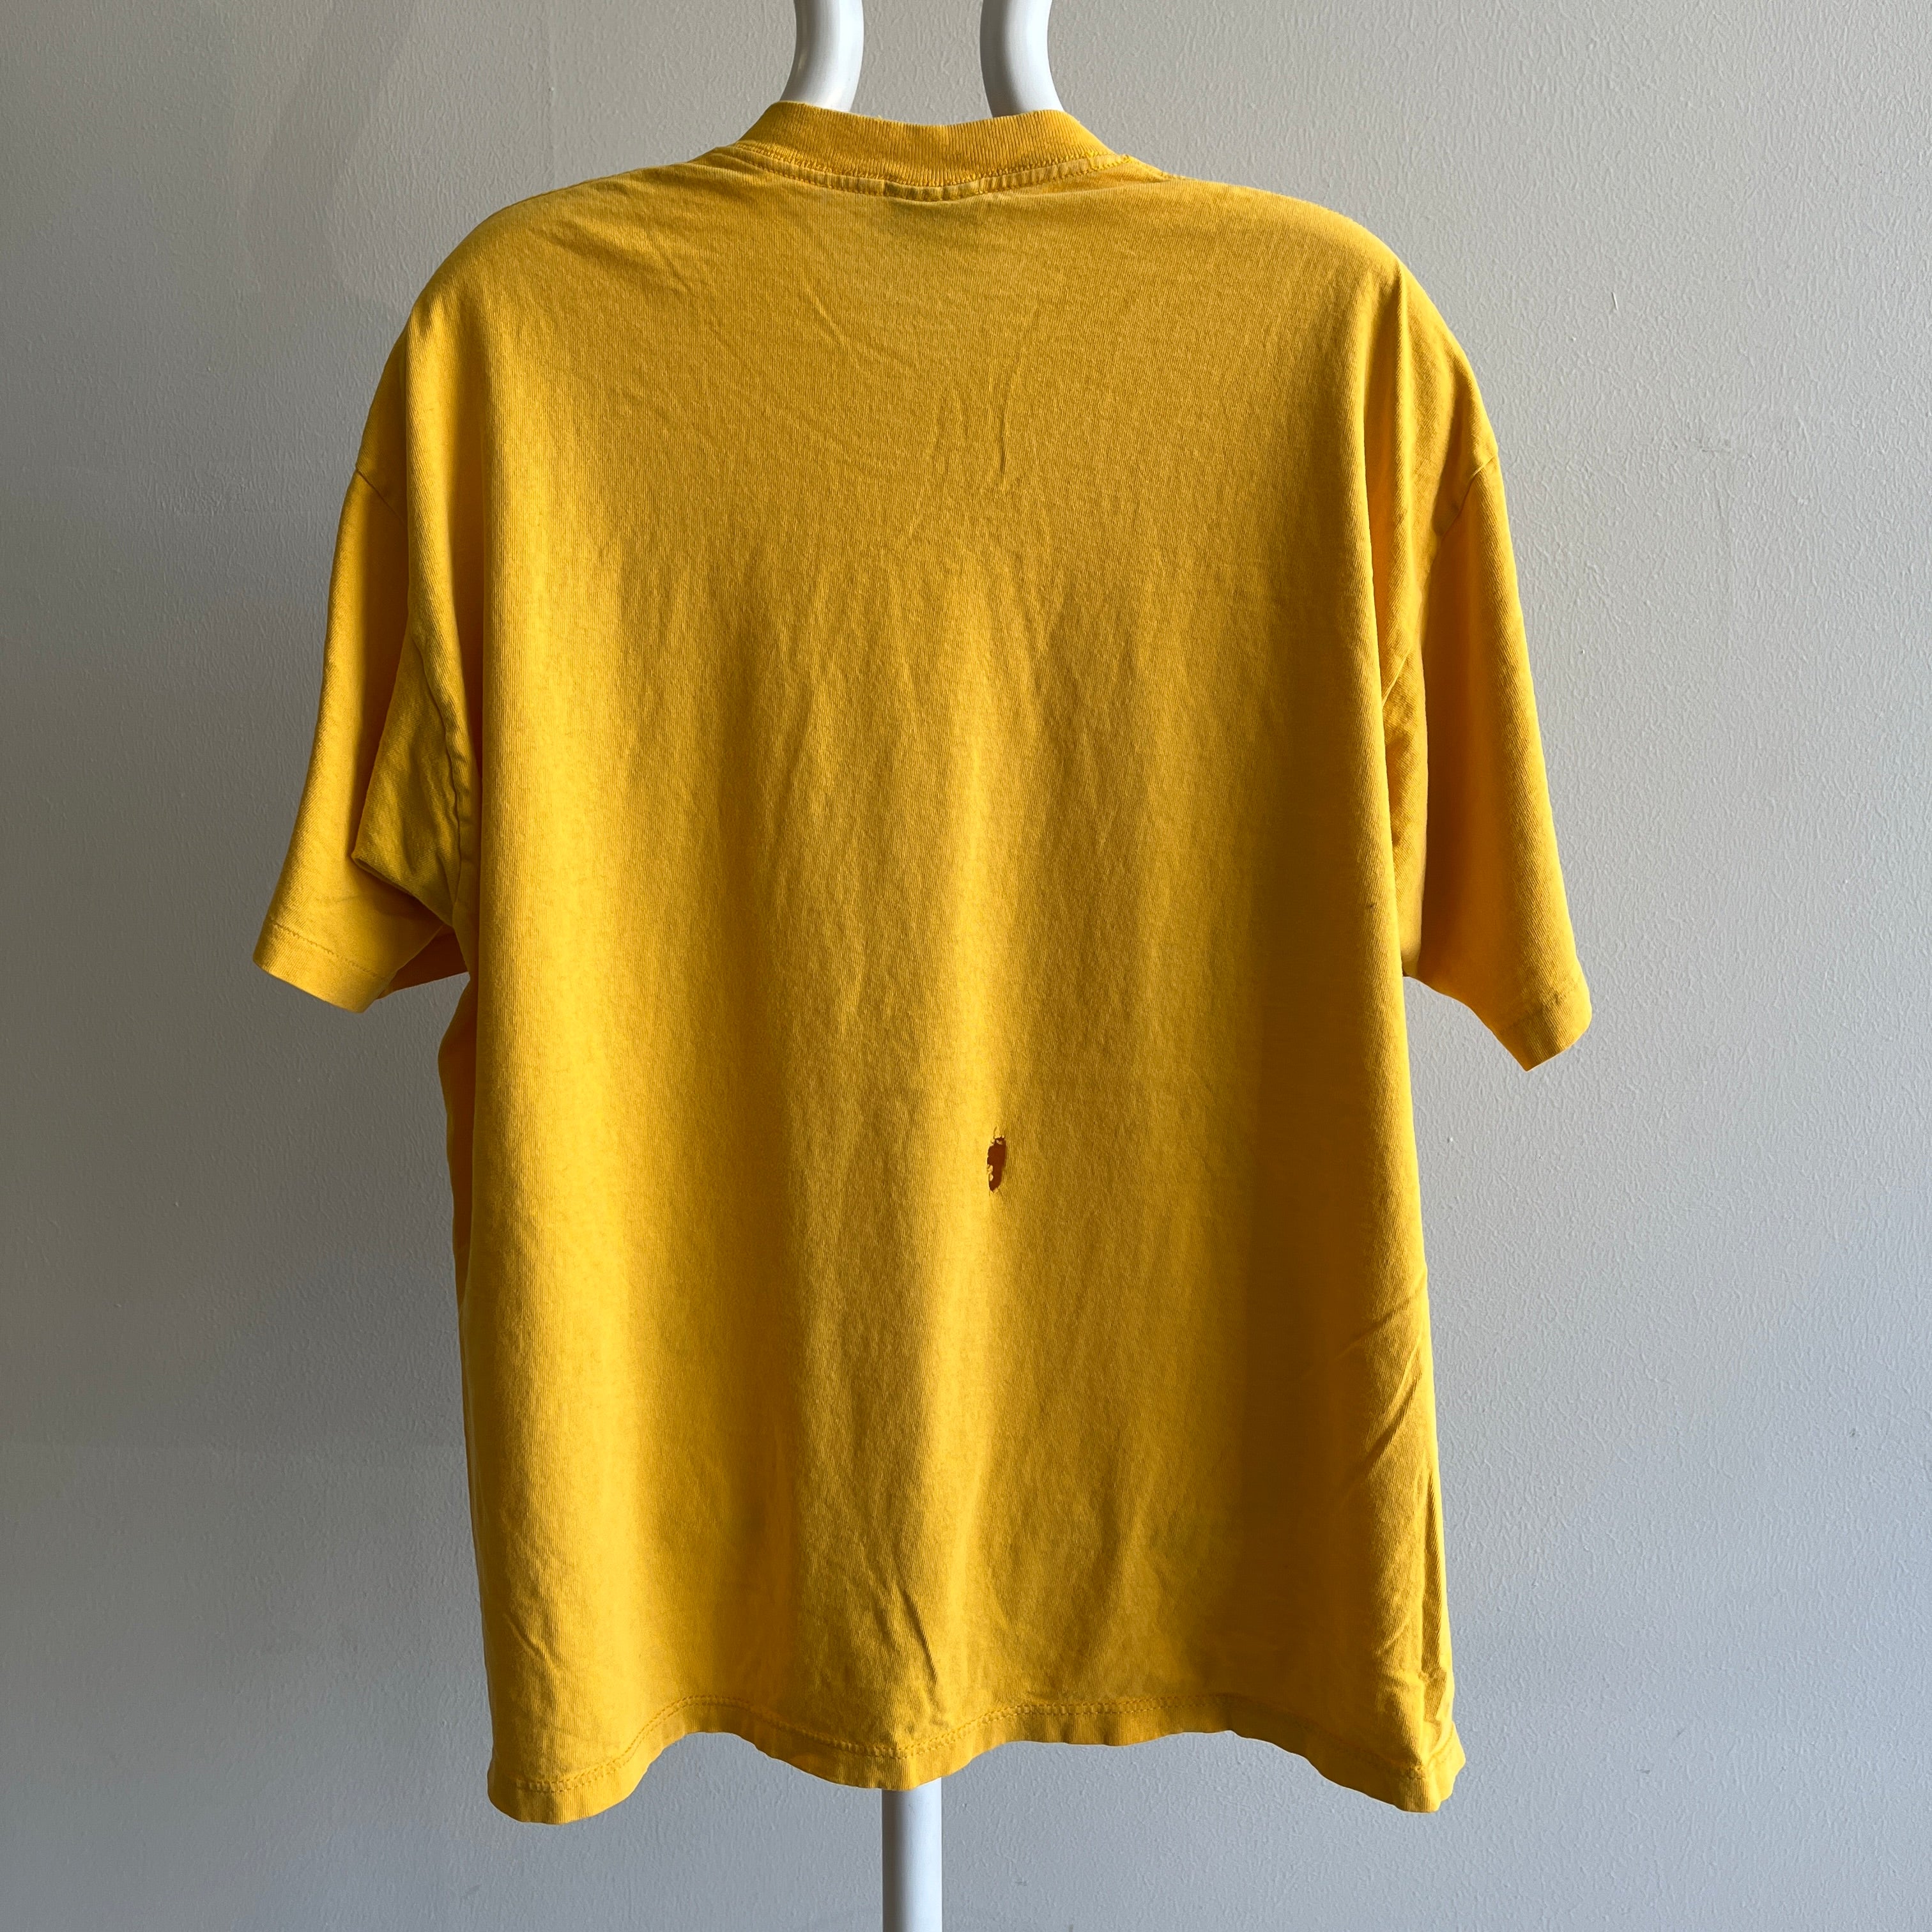 1990s Super Soft and Worn Marigold Yellow Cotton T-Shirt by Soffe